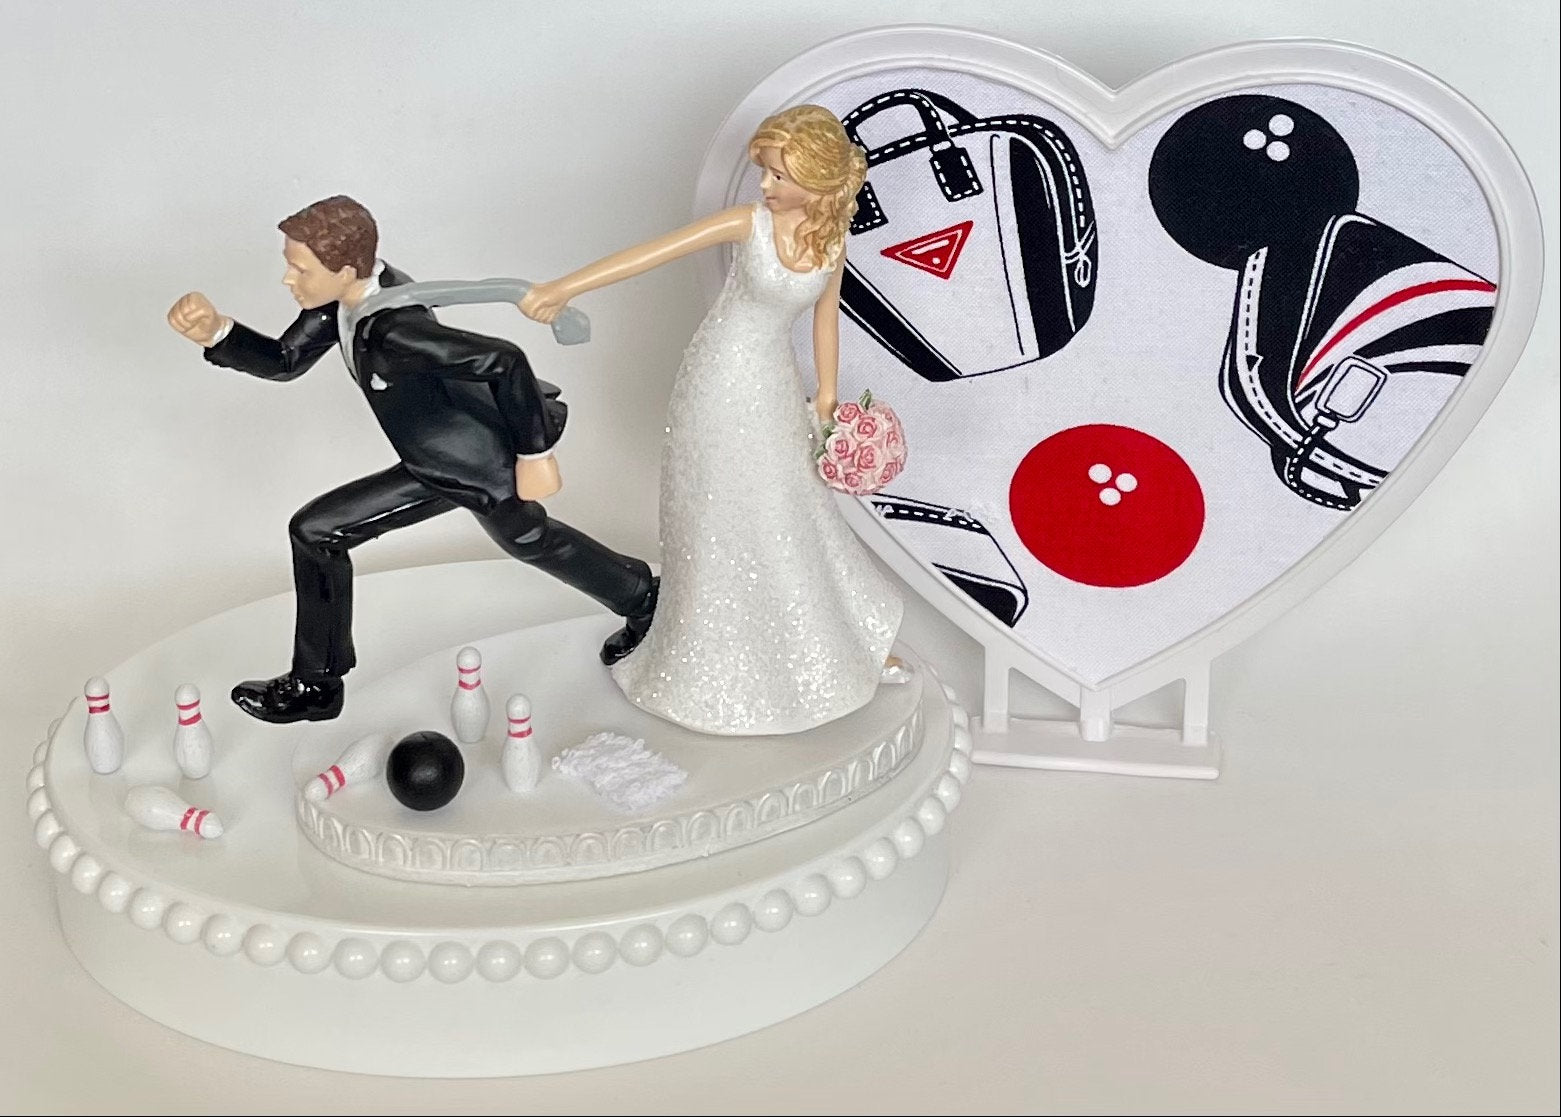 Wedding Cake Topper Bowling Themed Bowler Balls Pins Bag Towel Running Humorous Bride Groom Funny Sporty Fans Bridal Shower Gift Idea